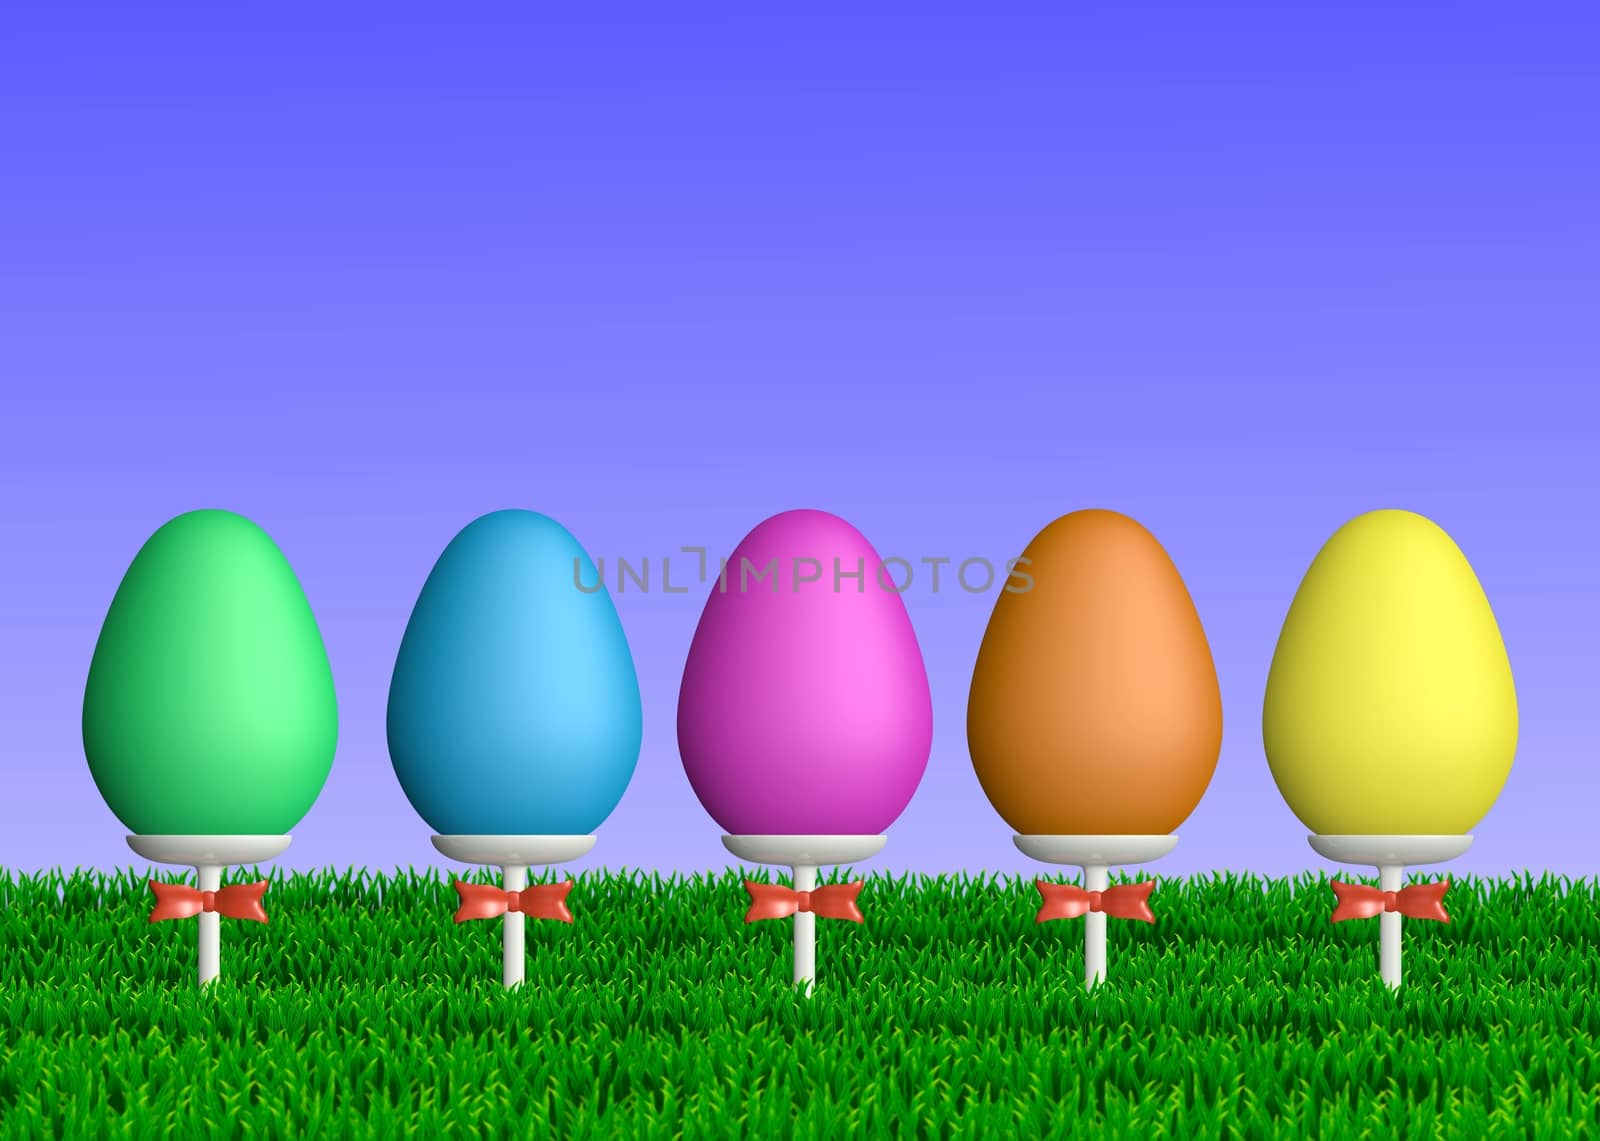 Colorful Easter Eggs on Sticks in Grass by RichieThakur